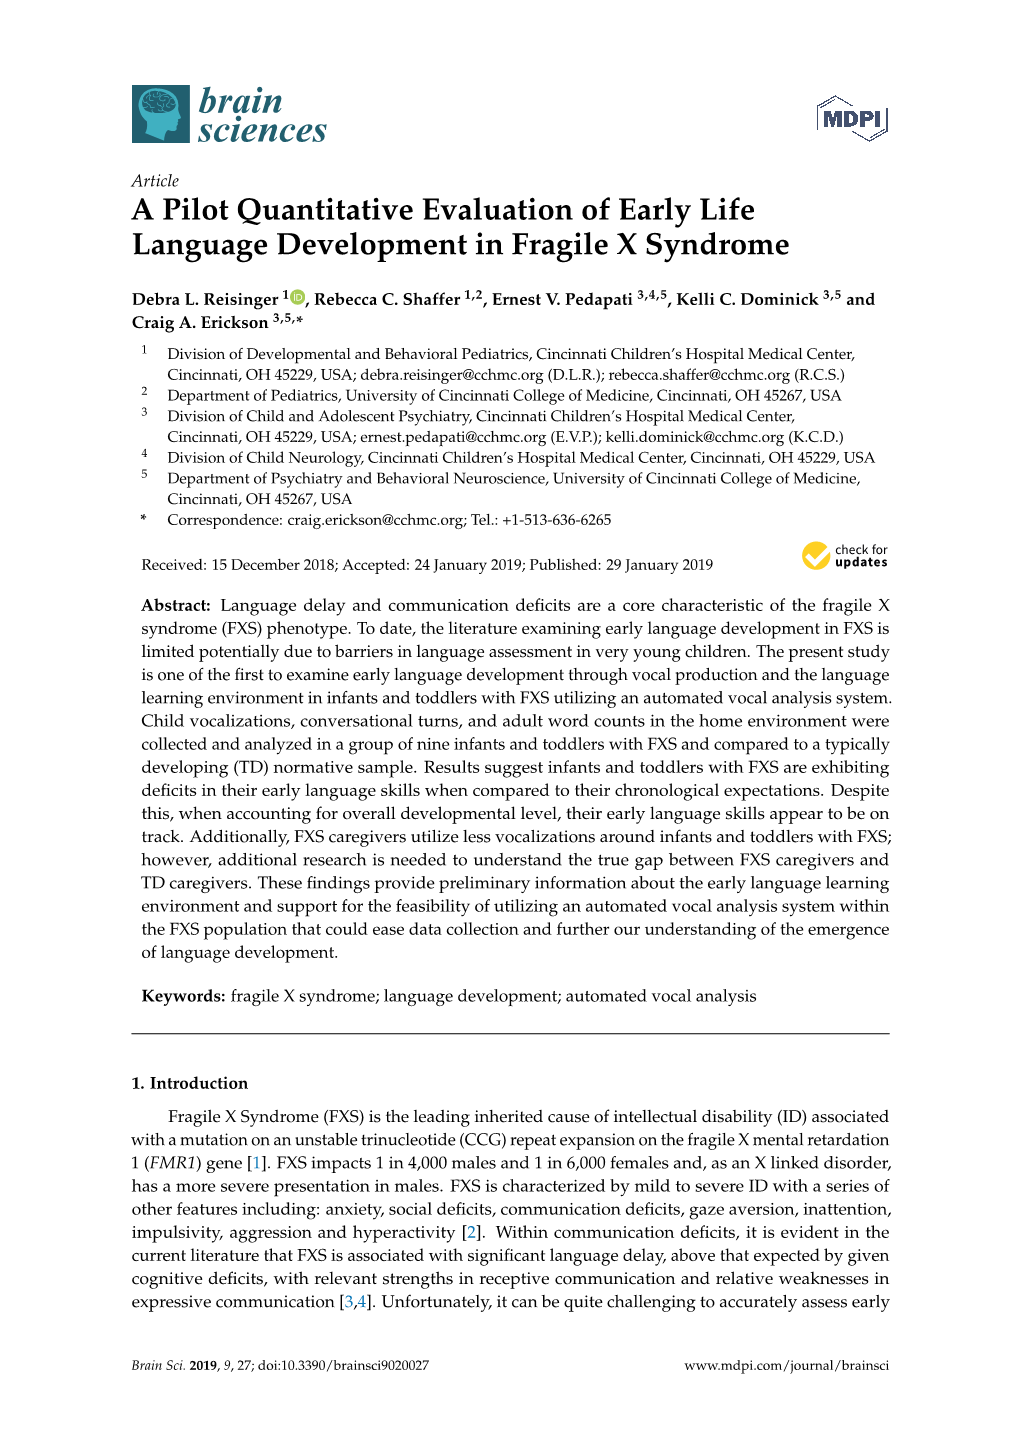 A Pilot Quantitative Evaluation of Early Life Language Development in Fragile X Syndrome